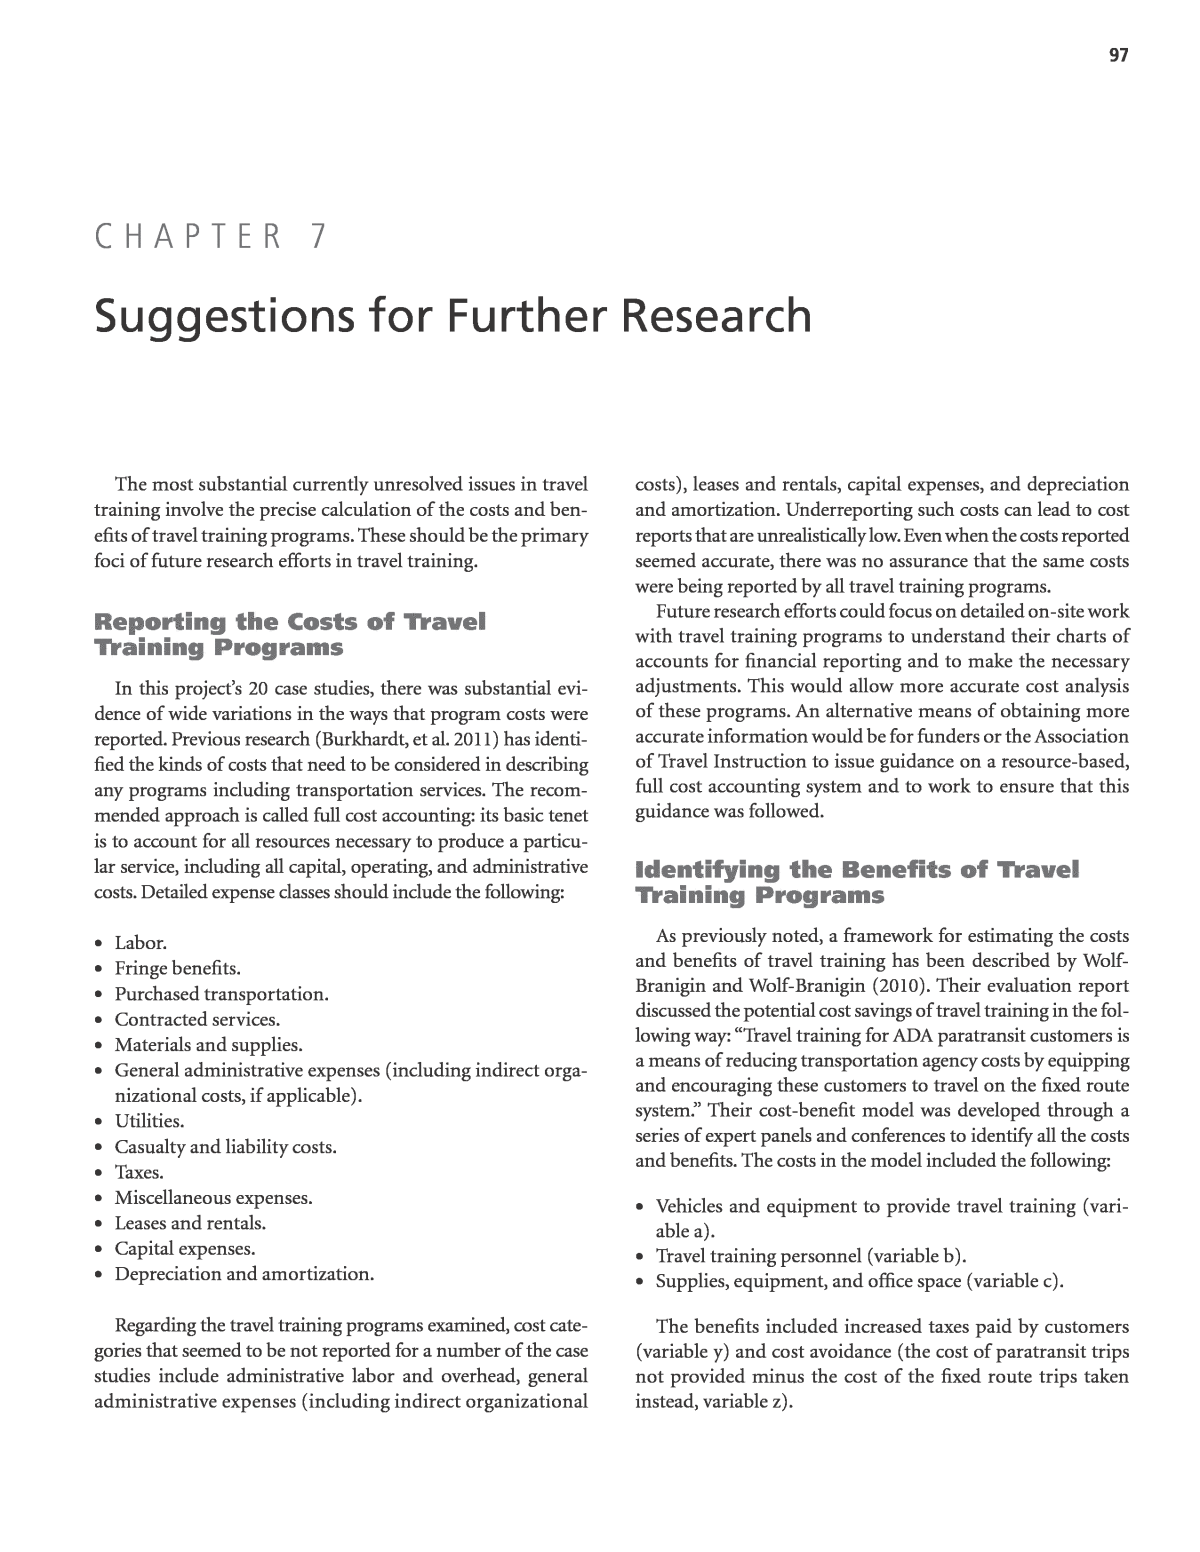 chapter-7-suggestions-for-further-research-travel-training-for